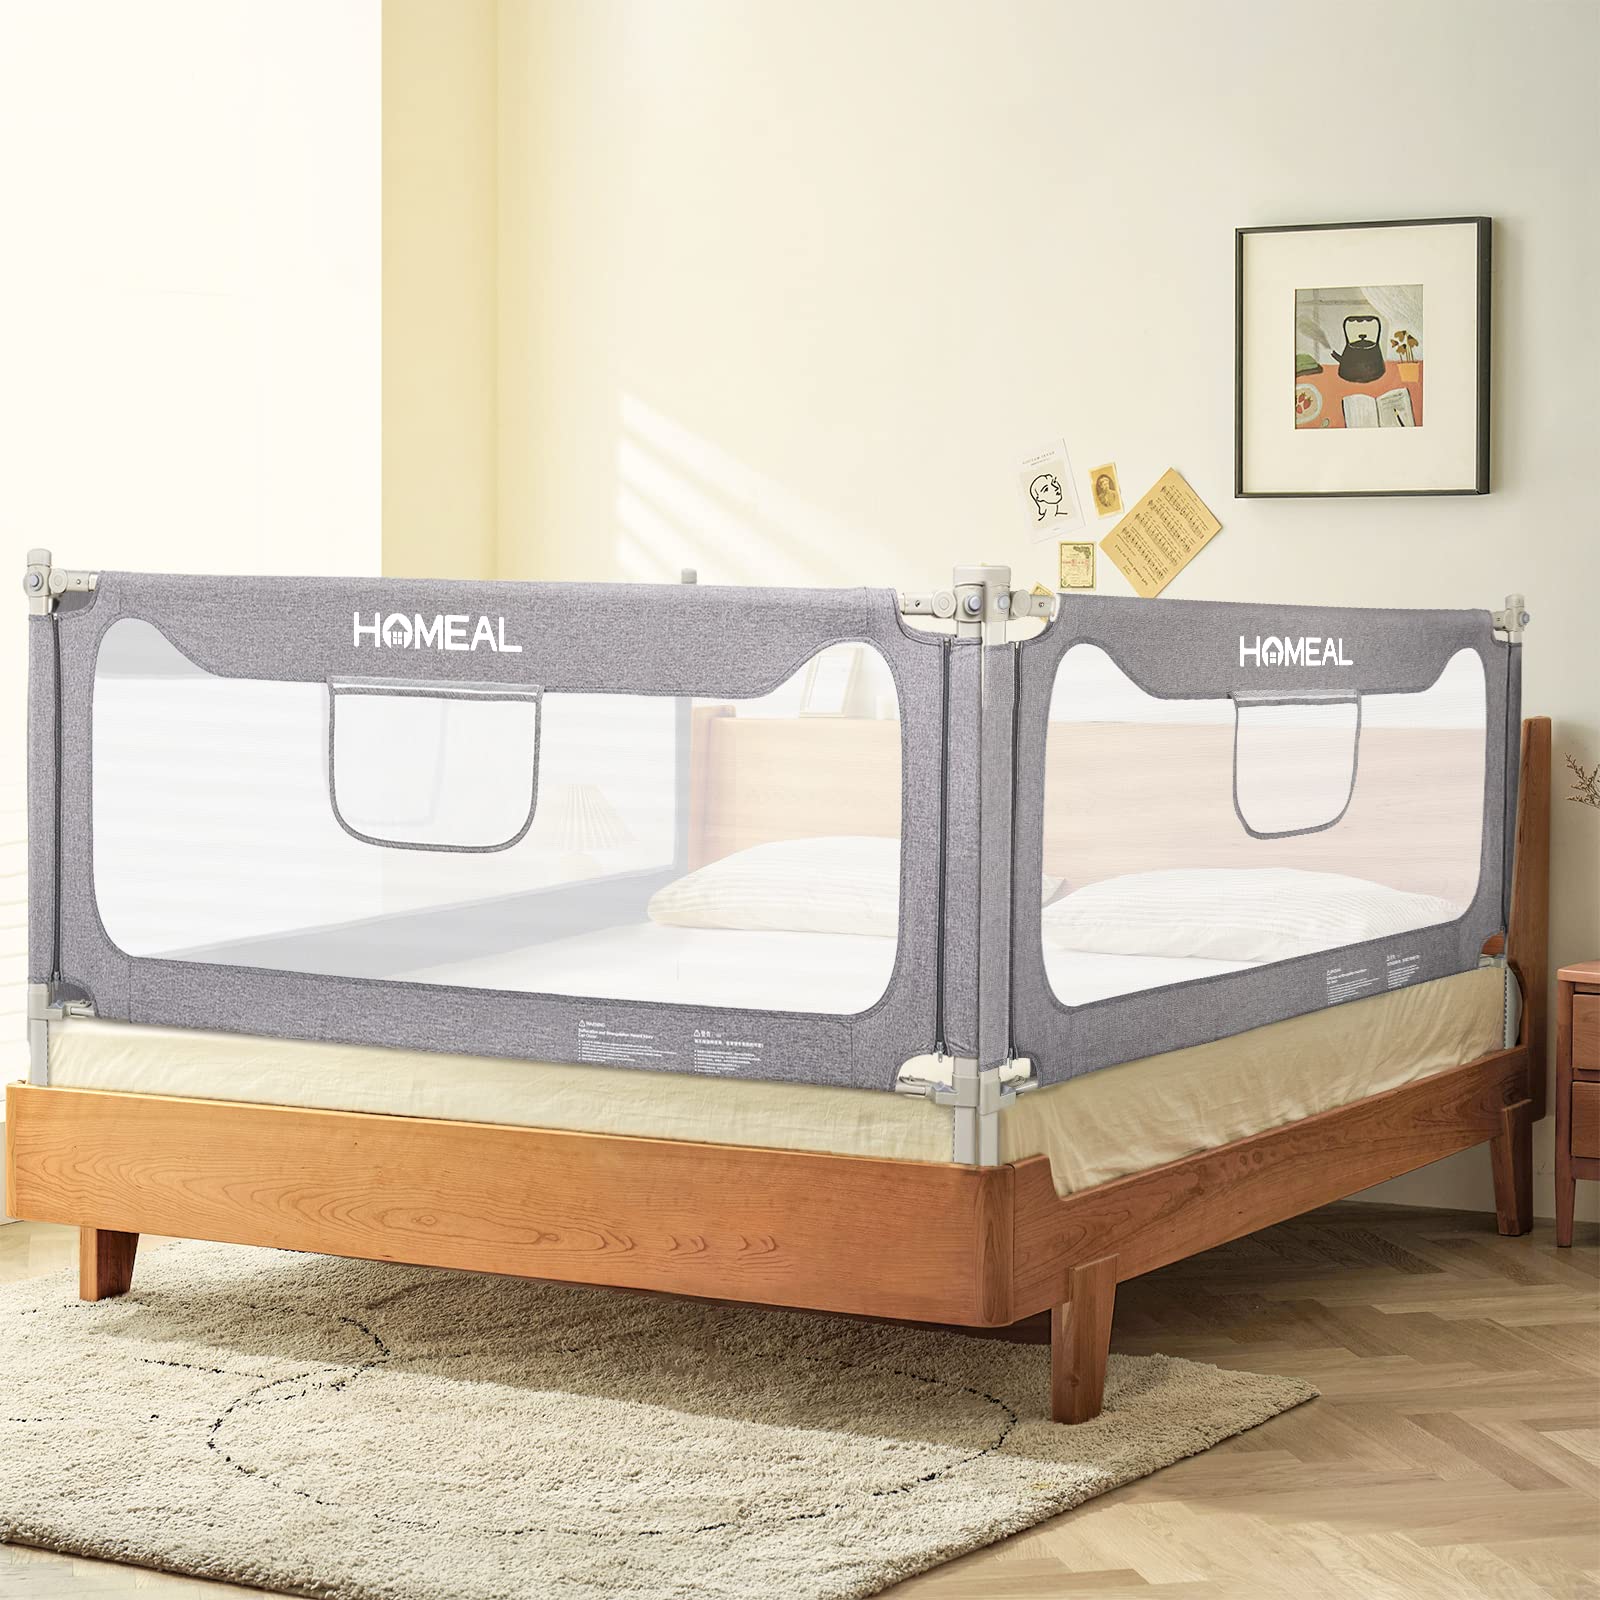 HOMEAL Bed Rail for Toddlers, Extra Tall Toddler Bed Rails, Infant